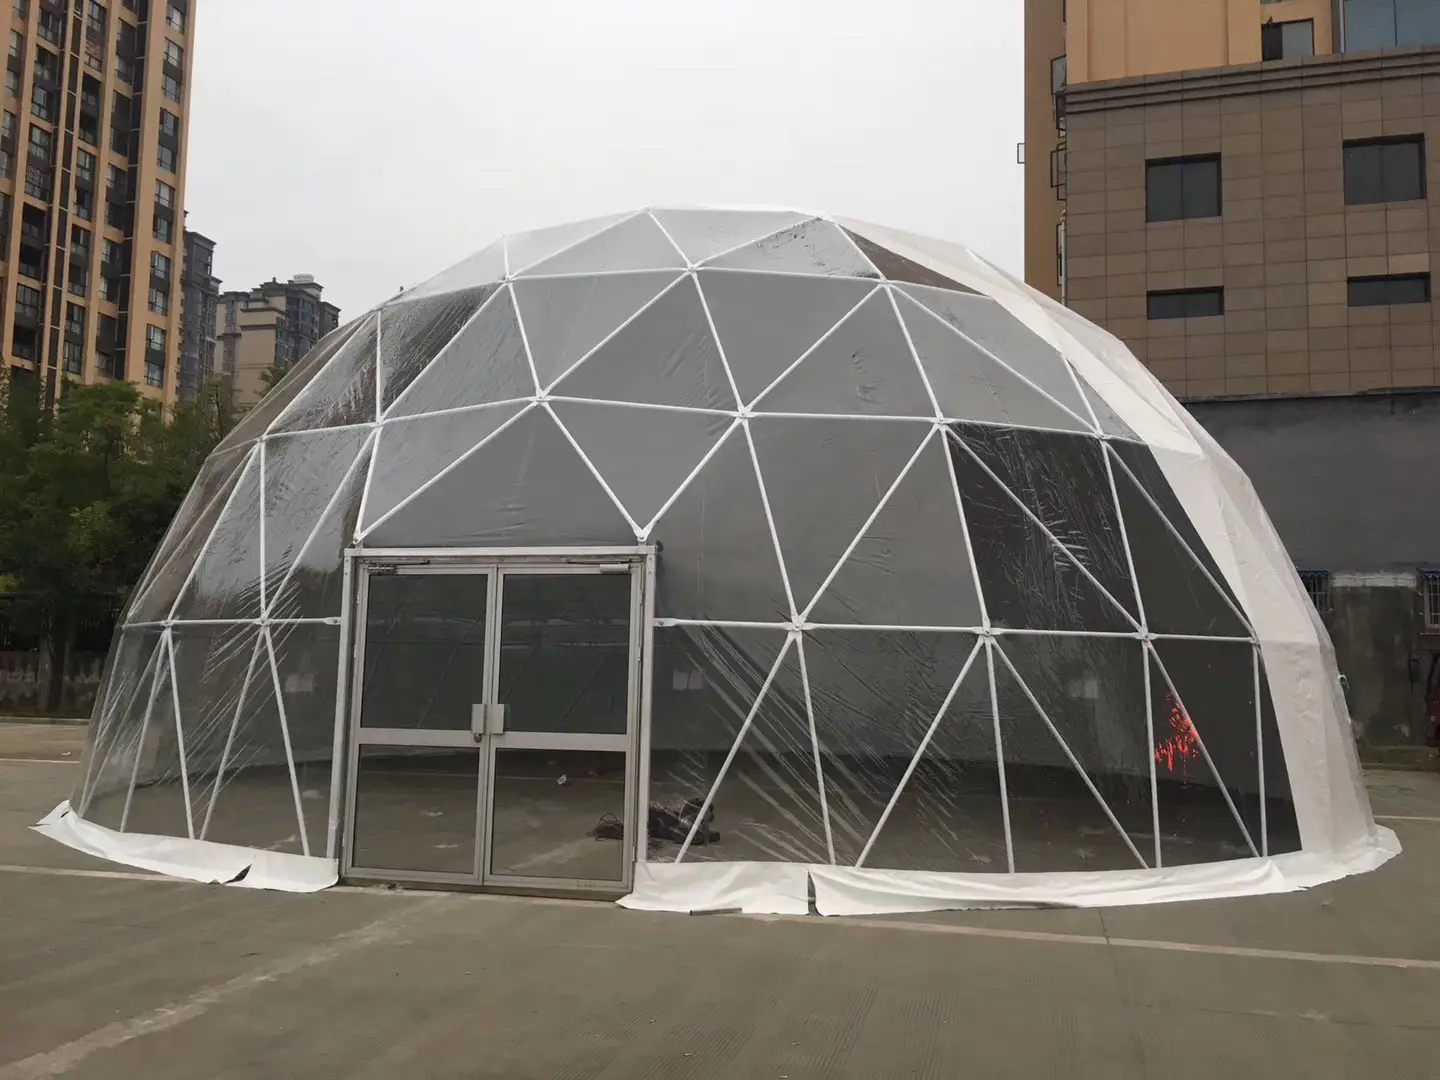 COSCO frame dome tent supplier dustproof